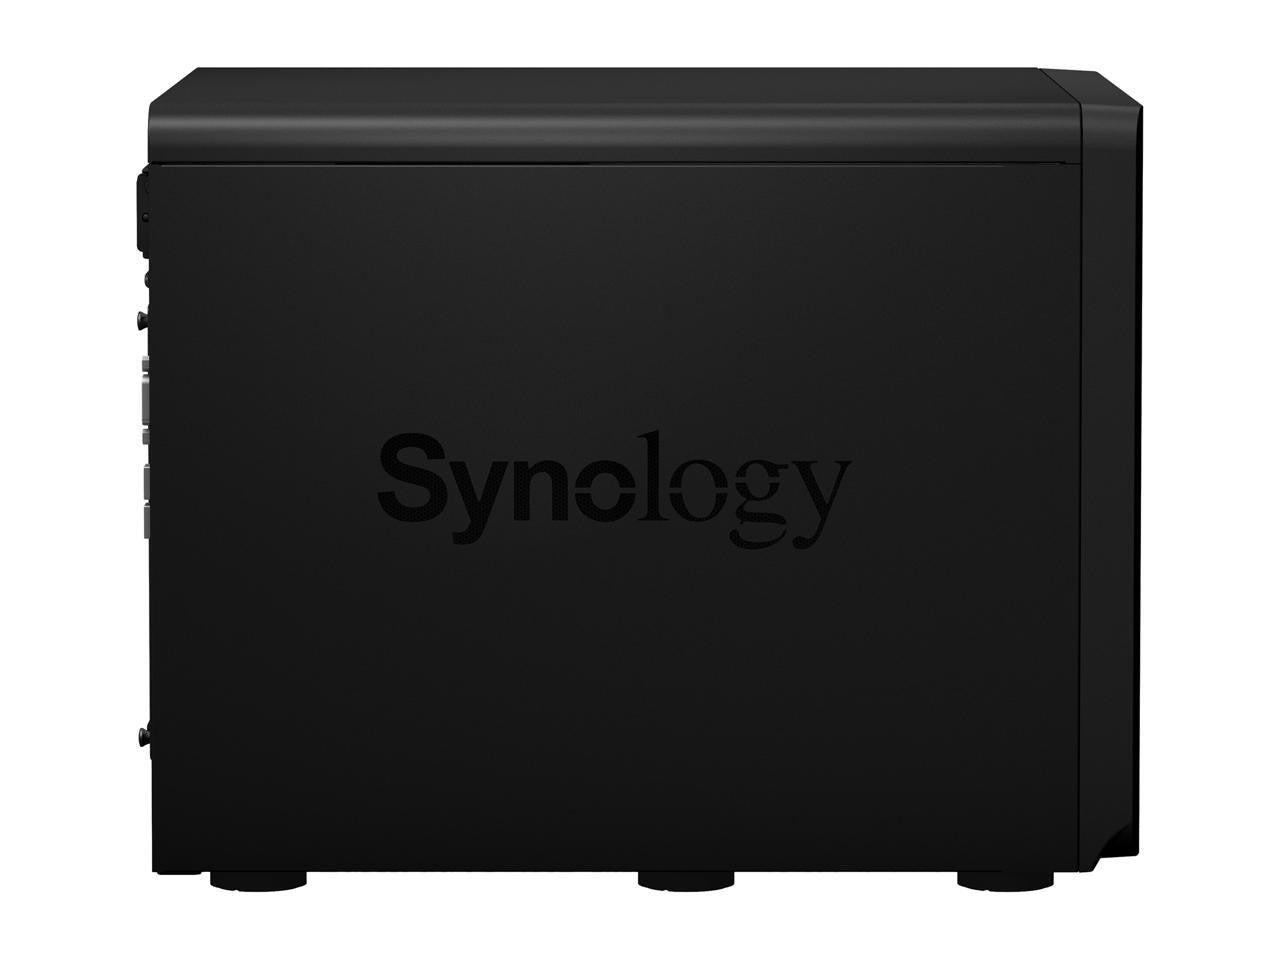 DS3622xs+ 12-BAY DiskStation with 32GB RAM and 96TB (12 x 8TB) of HAT5300 Synology Enterprise Drives